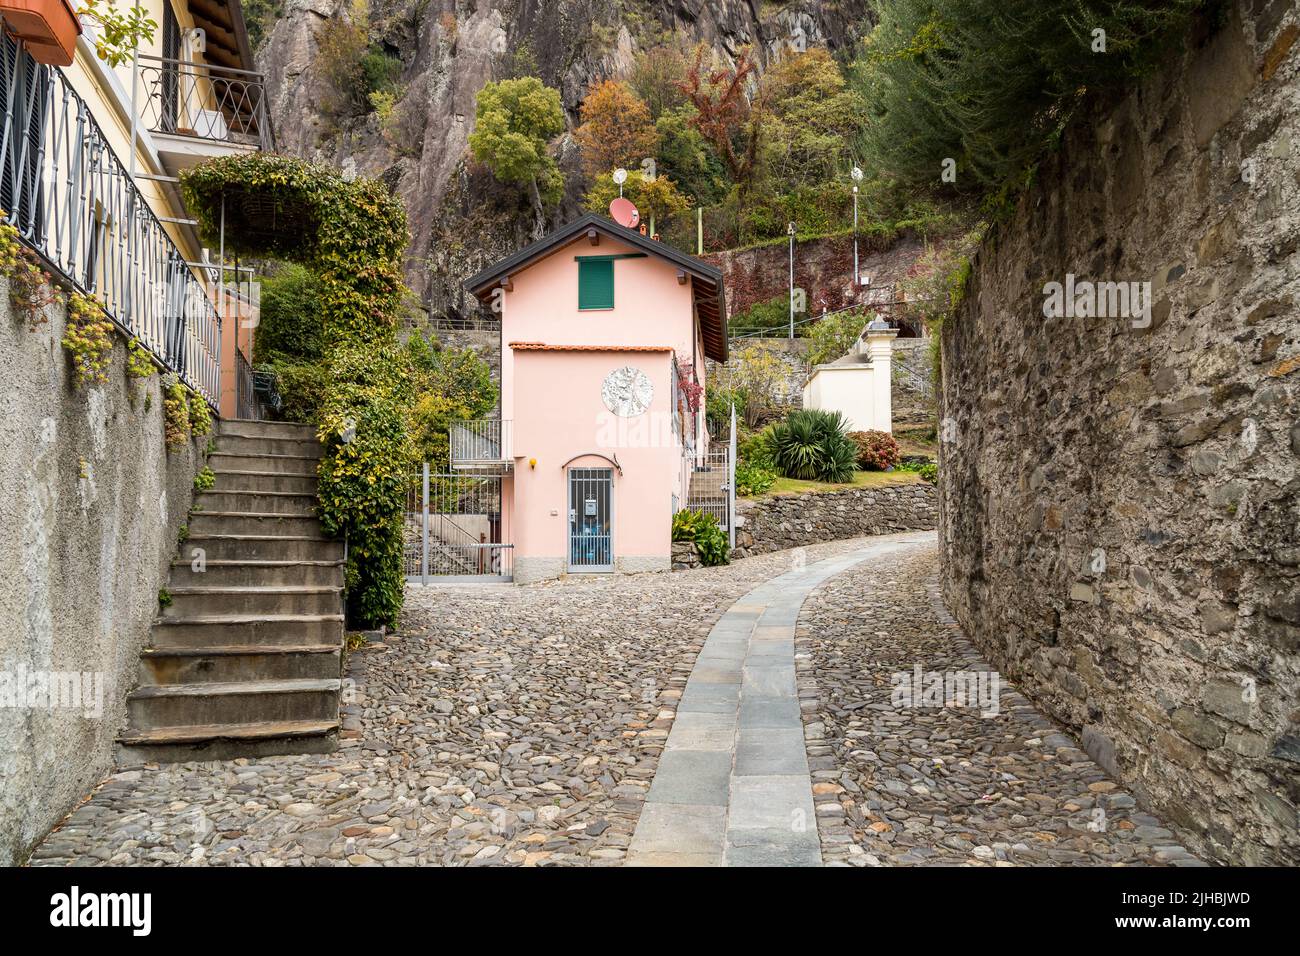 Cobblestone streets in the historic center of Maccagno Inferiore, is village situated on lake Maggiore in province of Varese, Lombardy, Italy Stock Photo